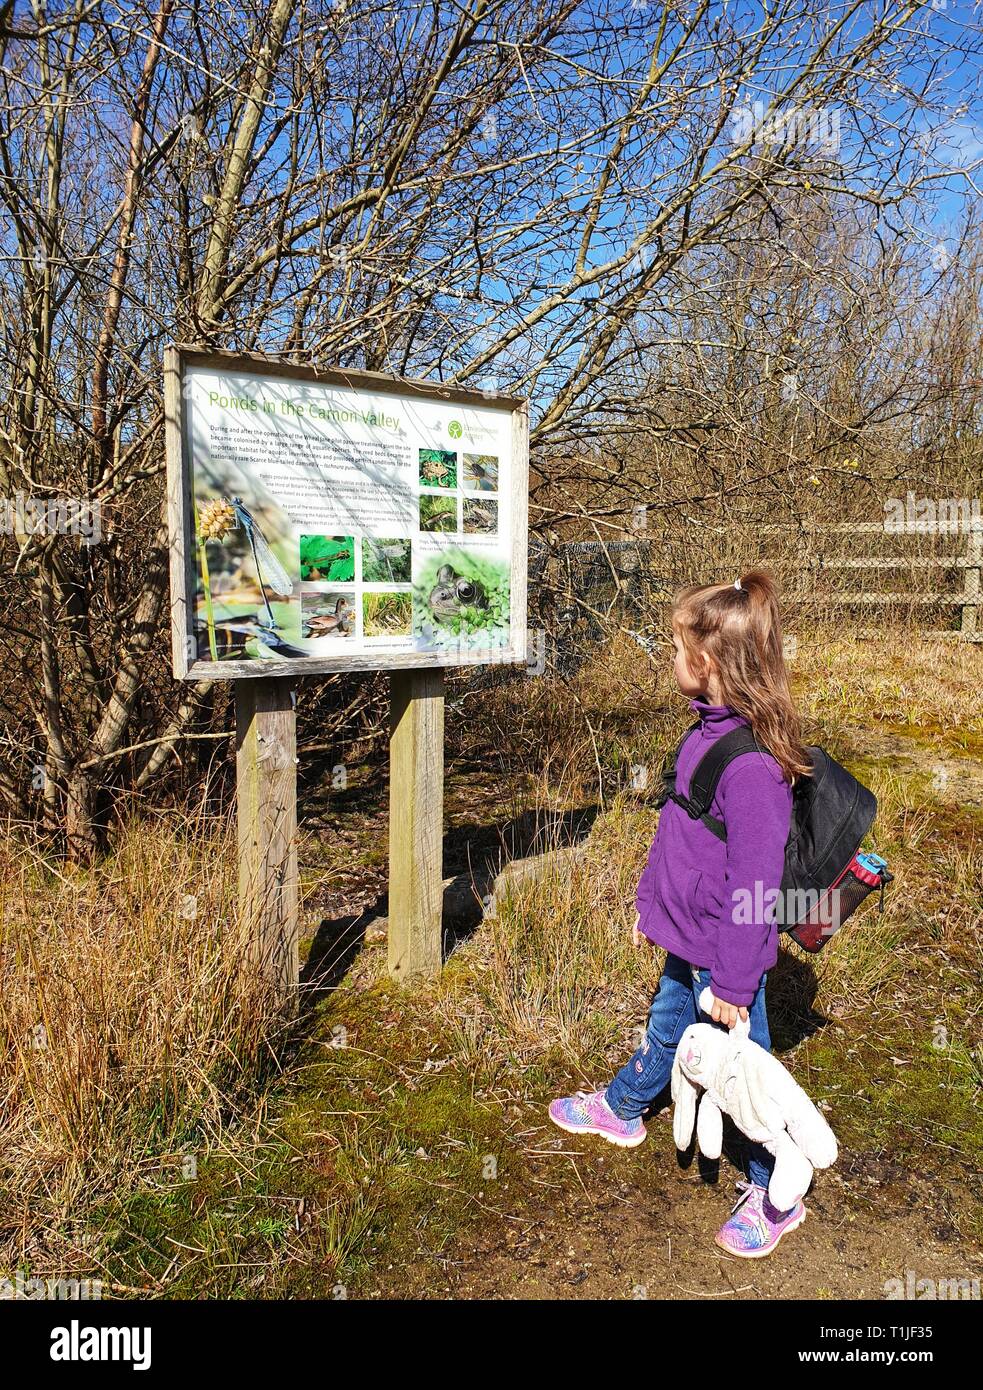 A young child reading the information board on a nature trail, in Devoran, Cornwall, United Kingdom. Stock Photo